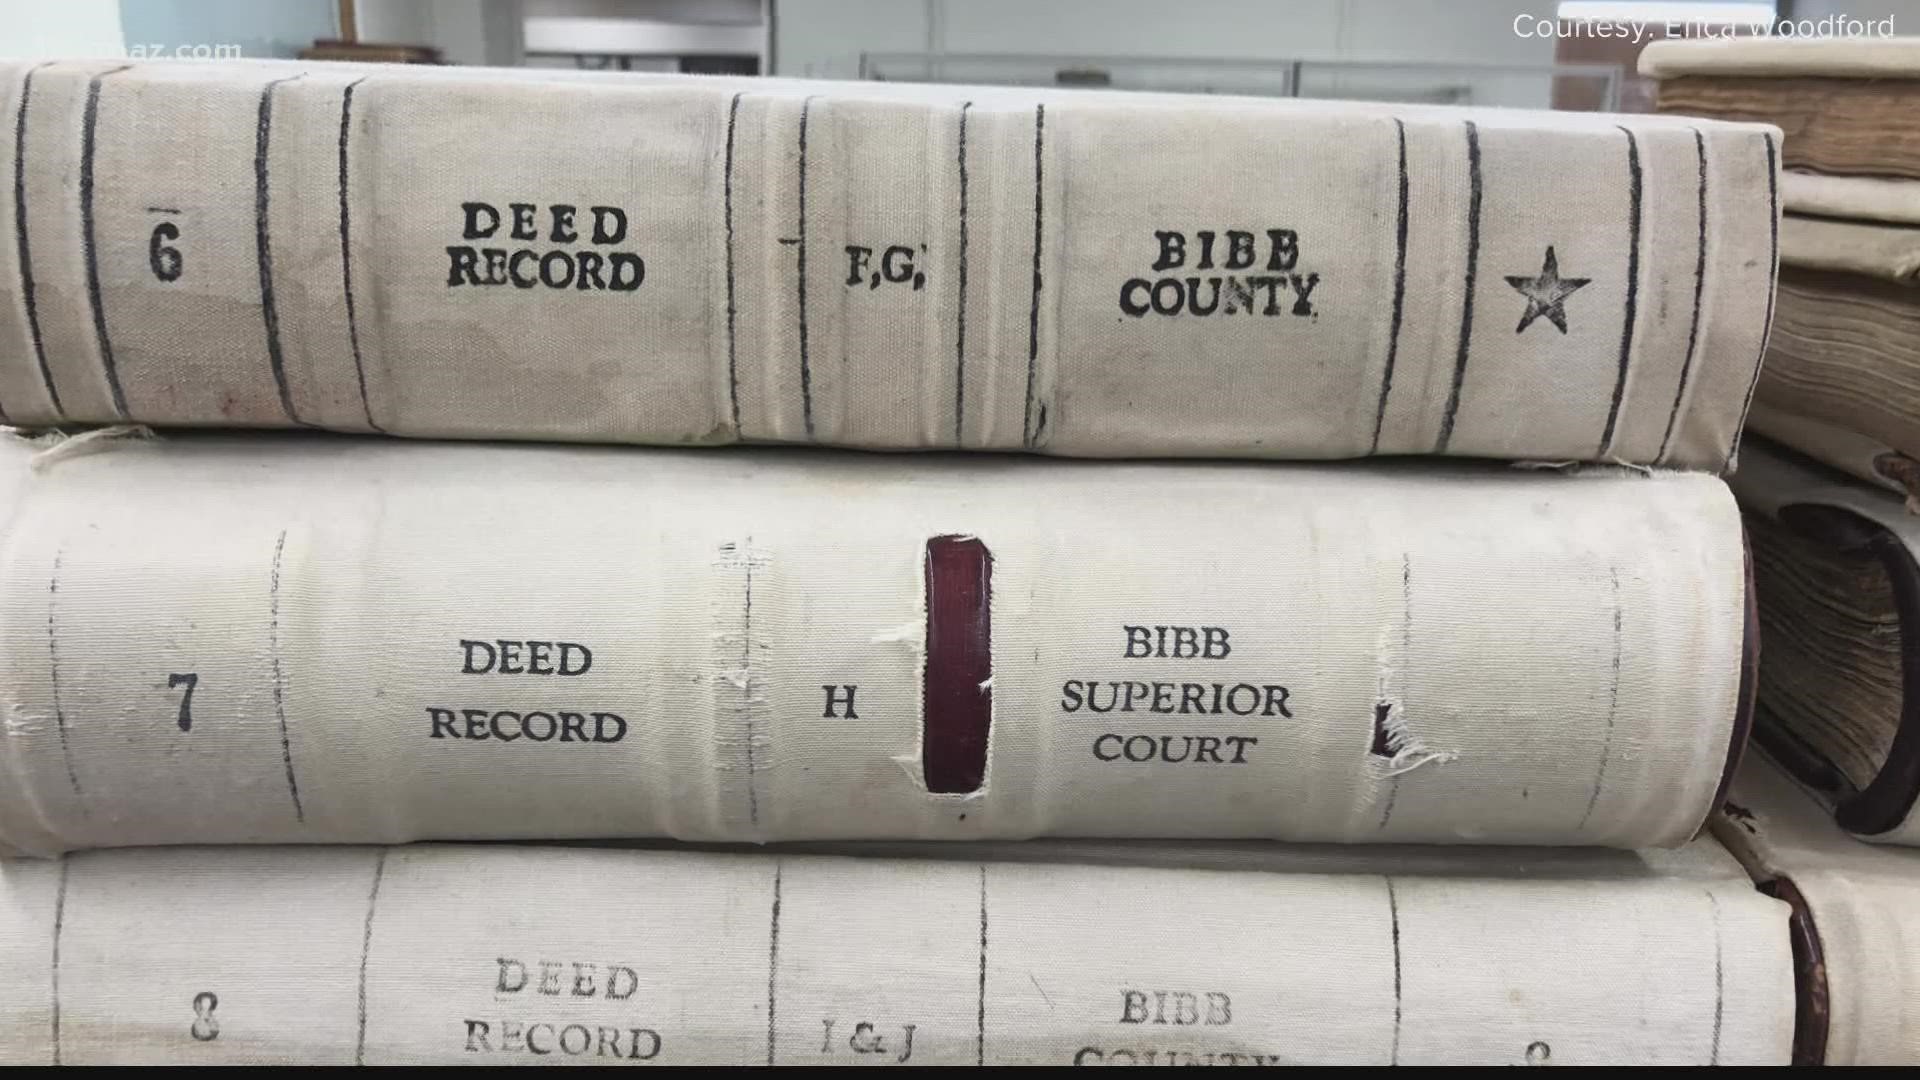 County Court Clerk Erica Woodford says the project promotes history that prompts healing: "Its to shed light on the rich robust history of Macon and Bibb County."